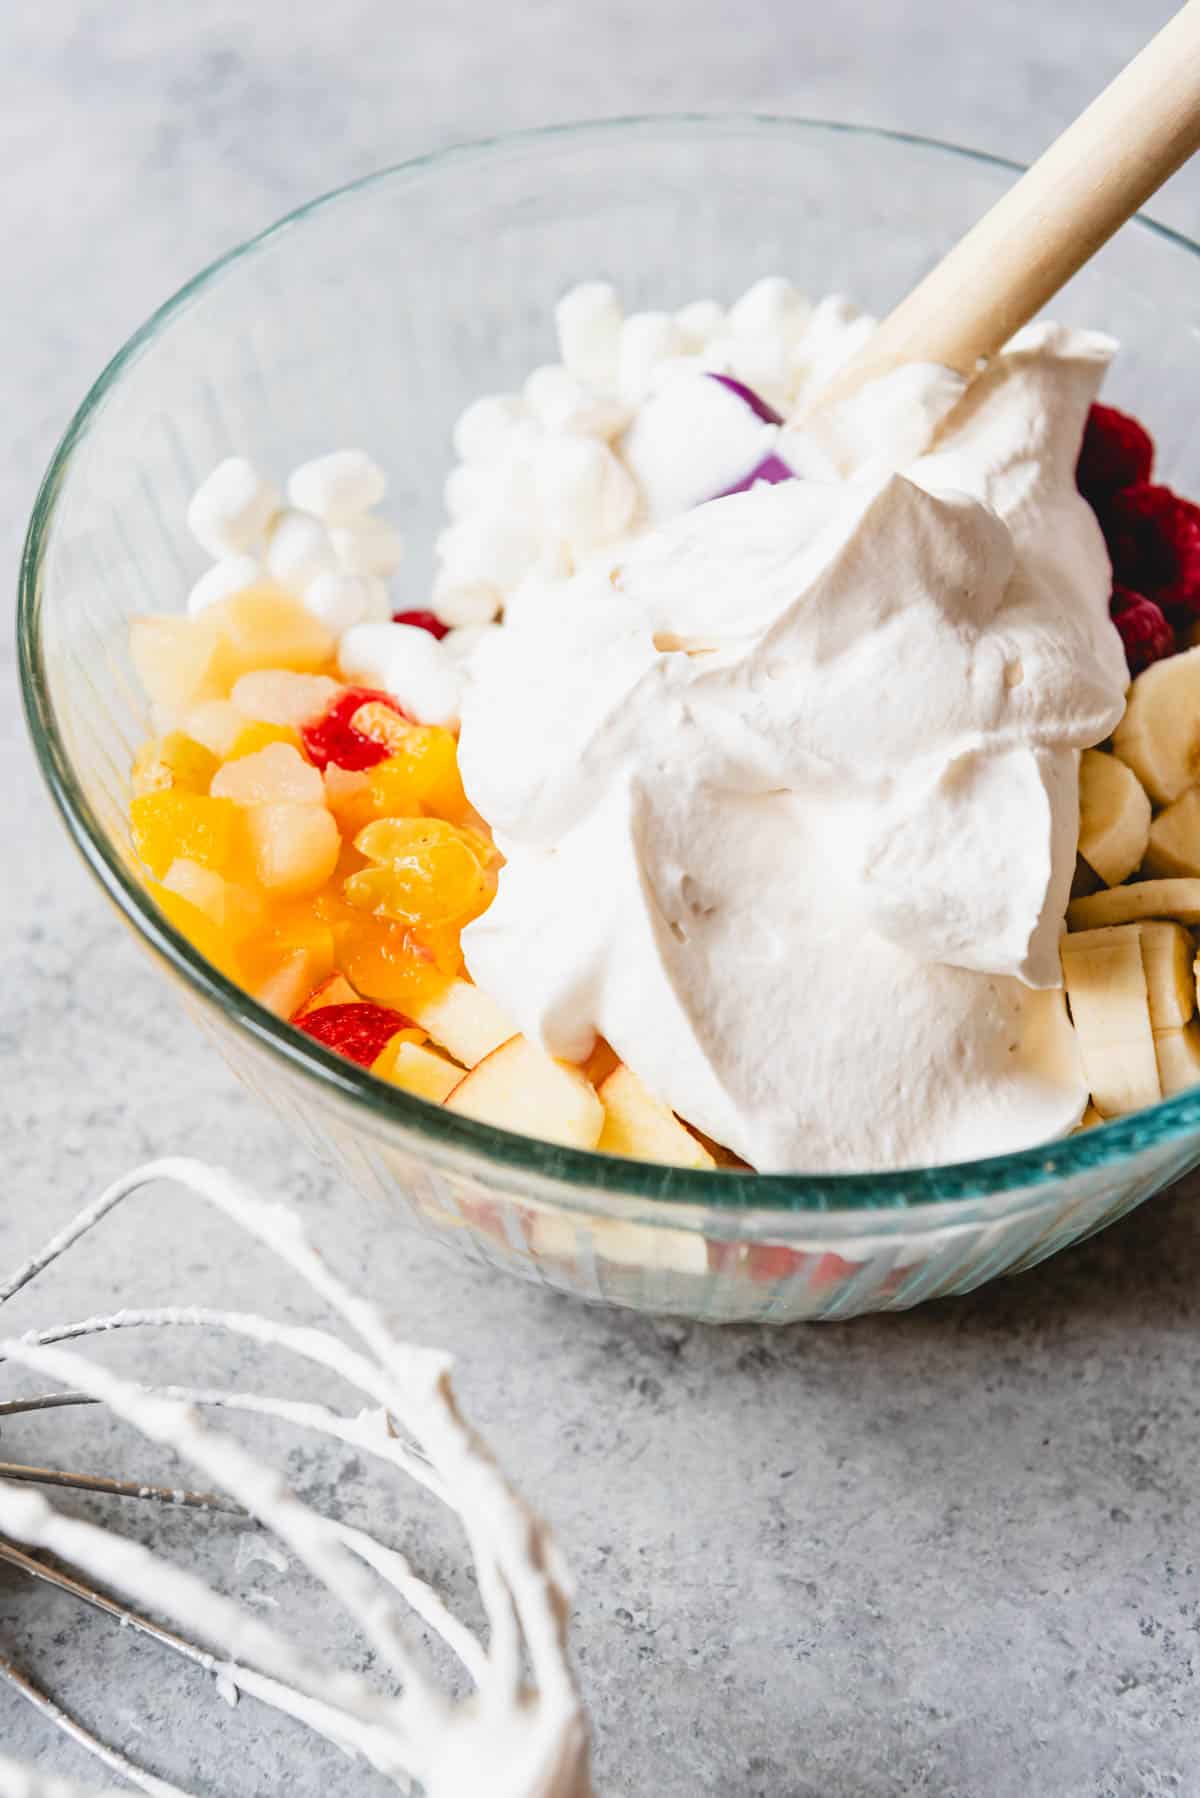 An image of a bowl of fruit cocktail with whipped cream, fresh fruit, and marshmallows for making an easy fruit salad.